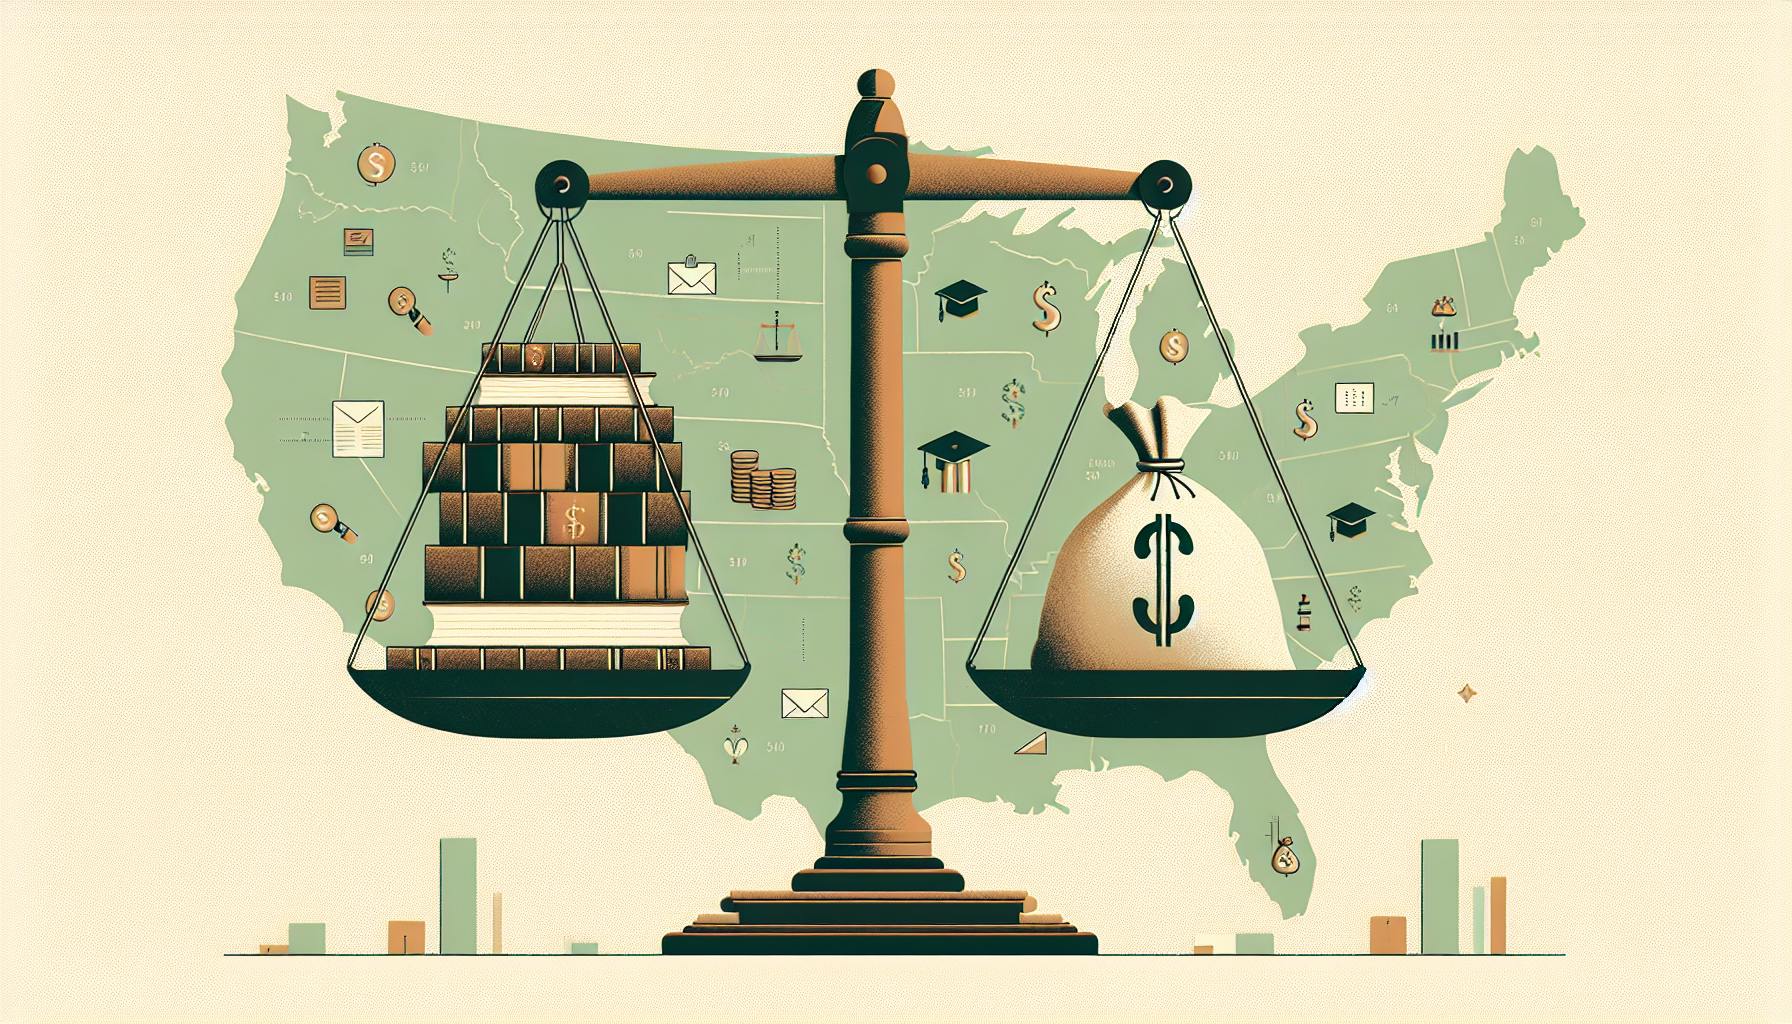 Legal Research Analyst Salary in the US: Decoding the Earnings Behind the Information